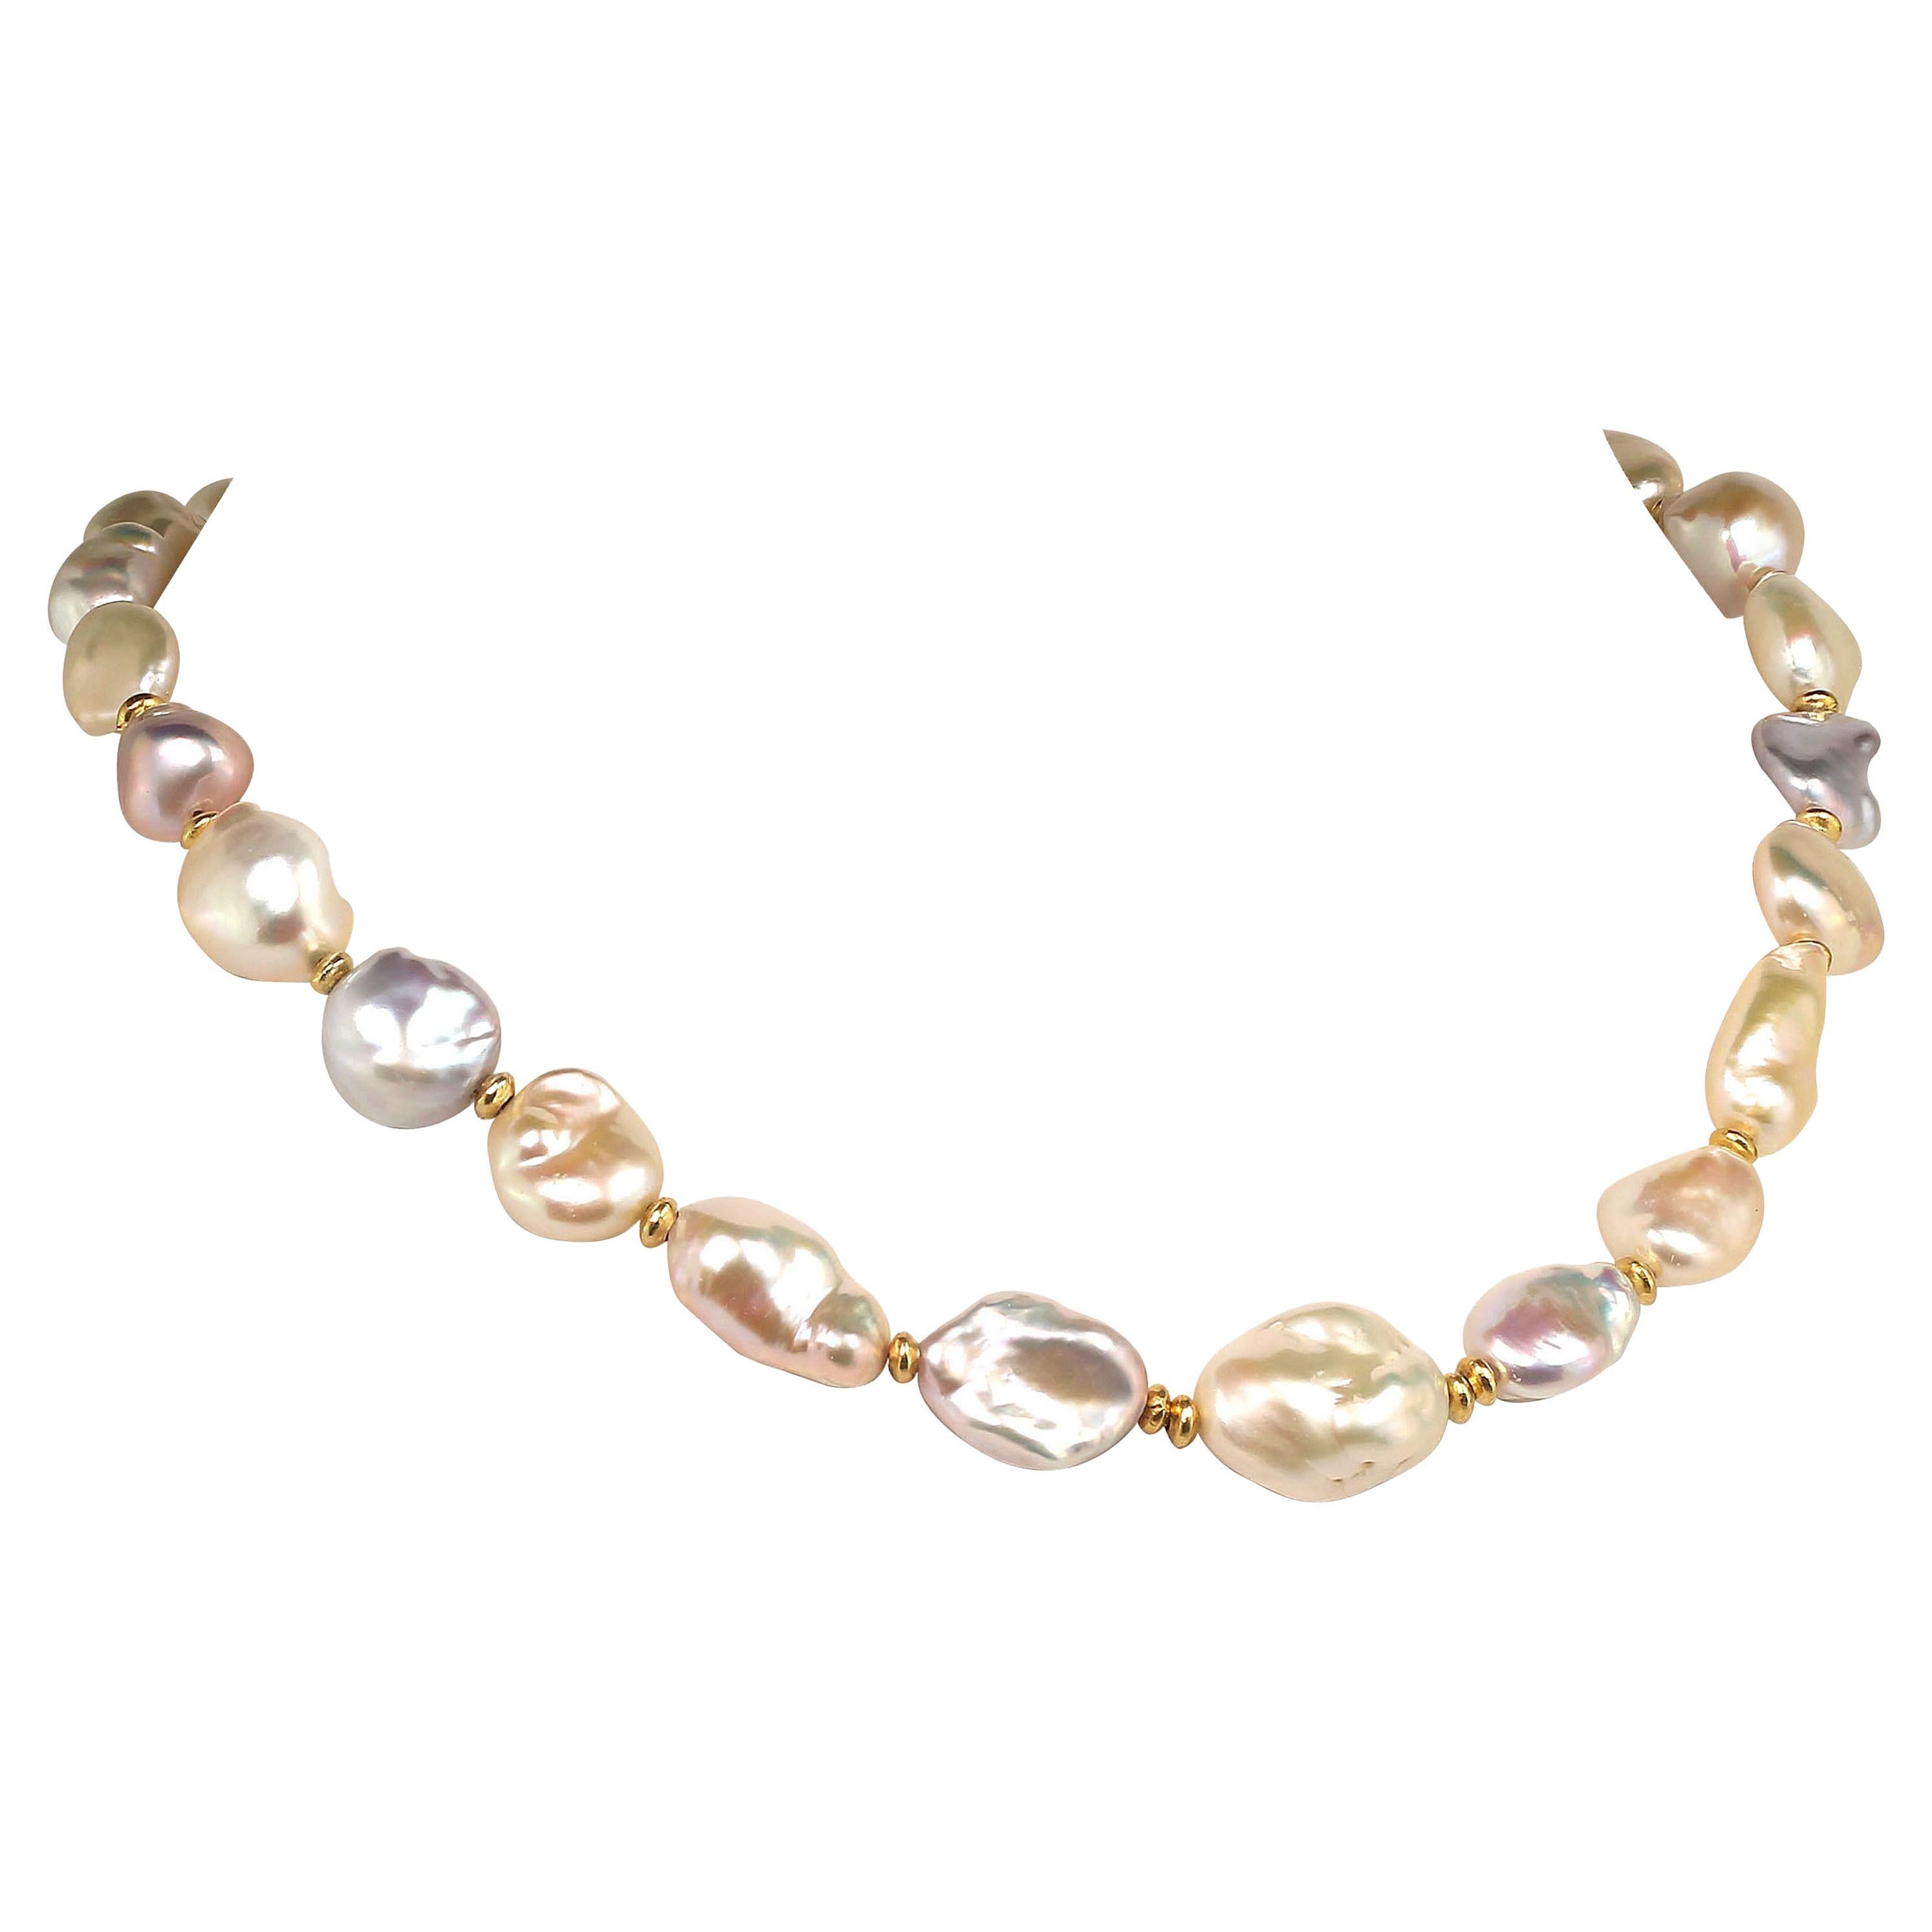 Gorgeous, Glowing, Iridescent Freshwater Pearl Choker Necklace June Birthstone